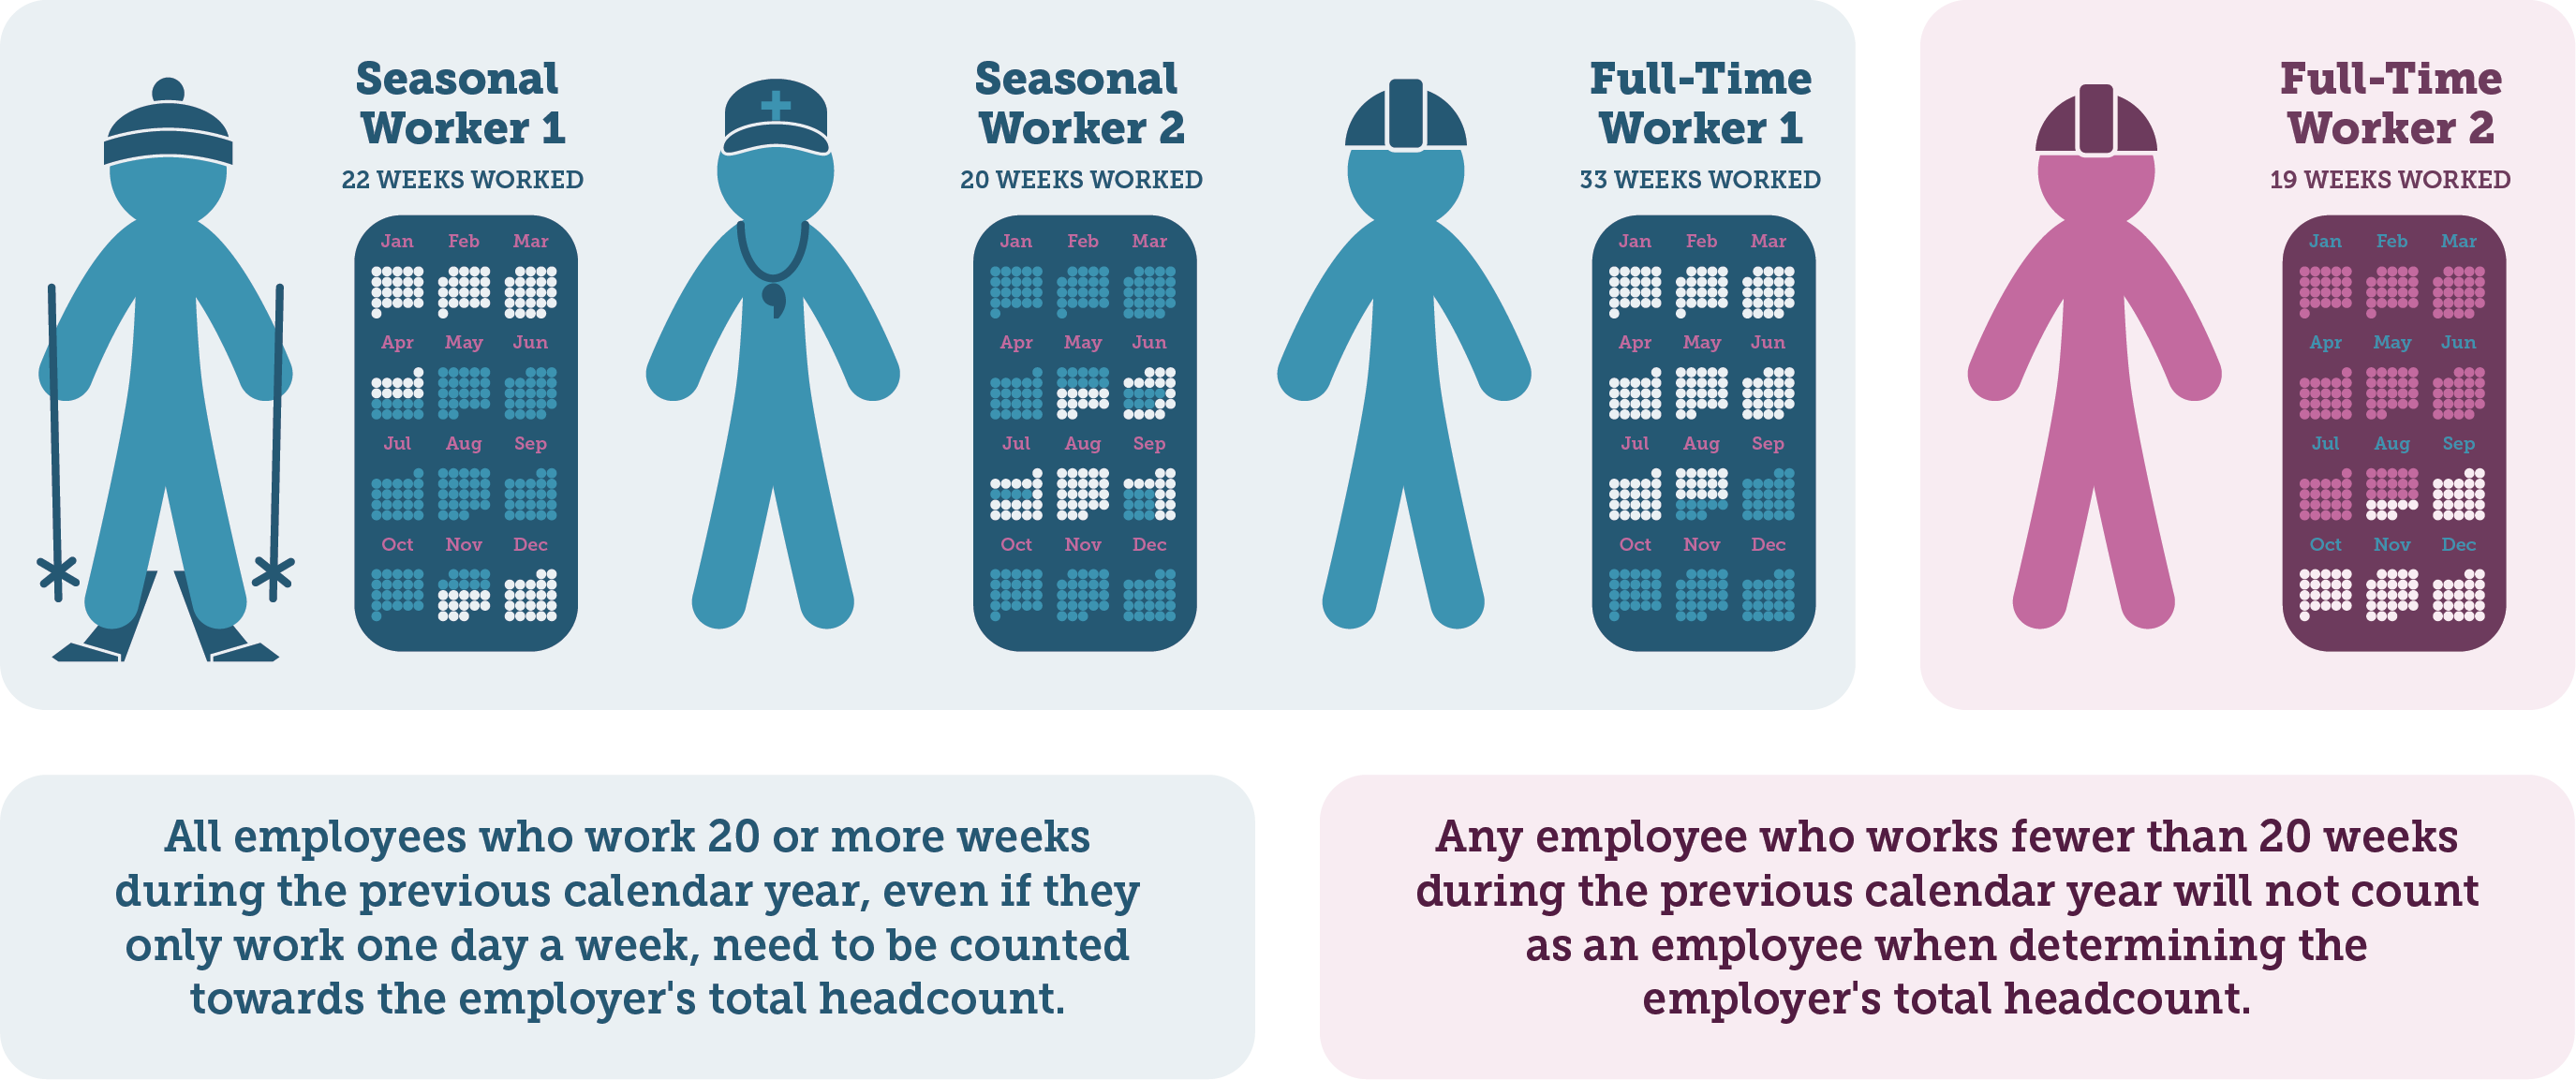 A graphic example of how to count employees, explanation is within the text that follows.